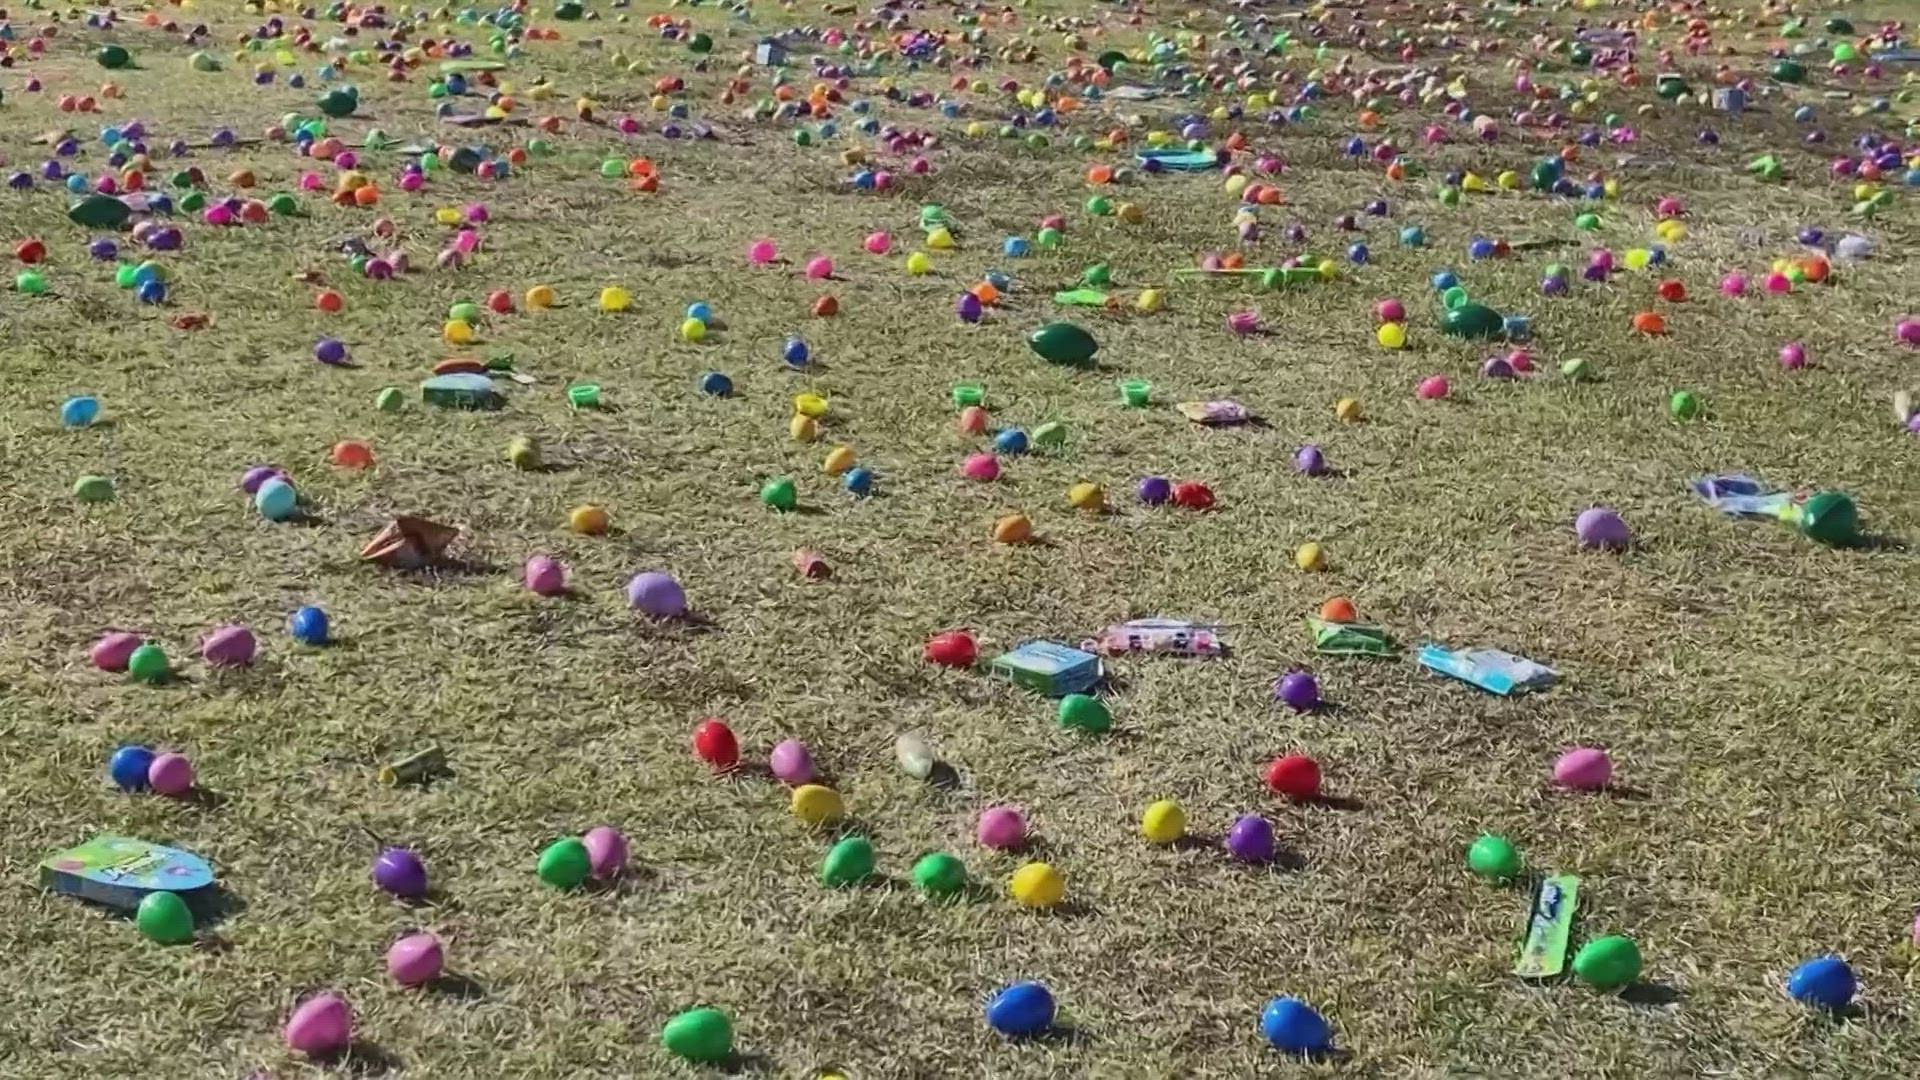 Monahans also got a head start on Thursday for this Easter. The families had their annual Easter egg hunt where more than 30,000 eggs were used for the kids Easter.